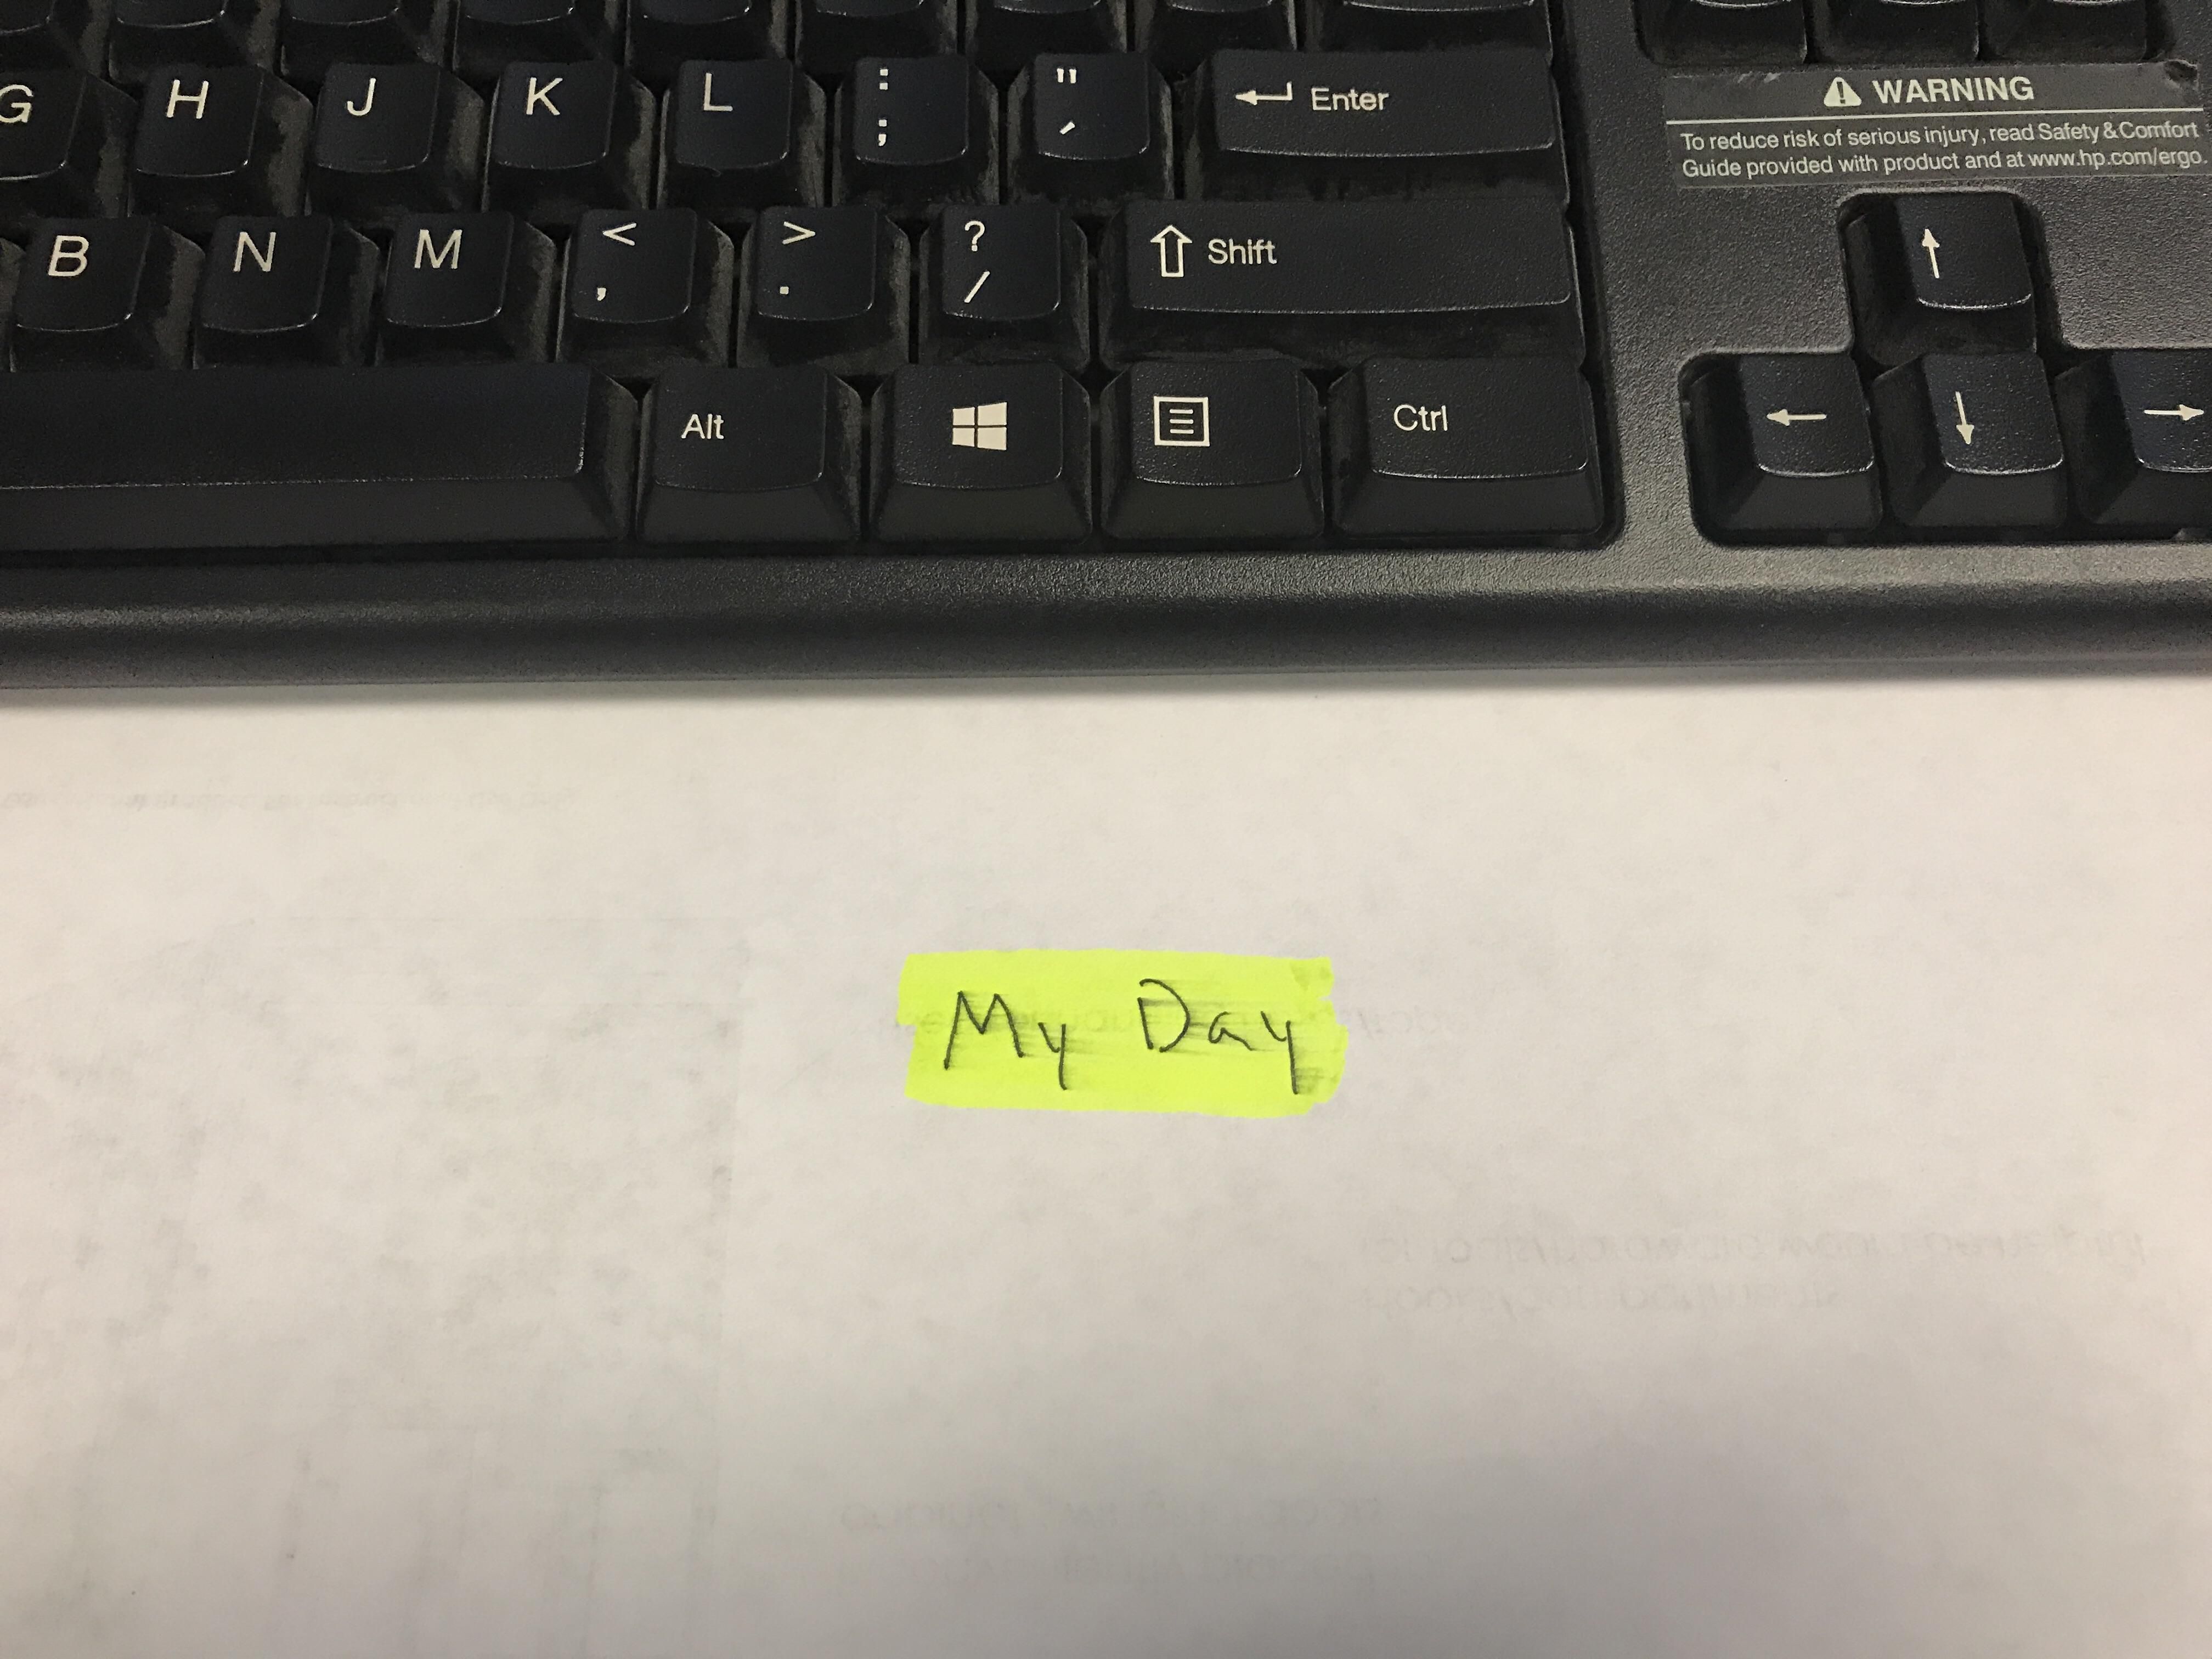 My boss told me she left something special on my desk, and that it would be the "highlight of my day"